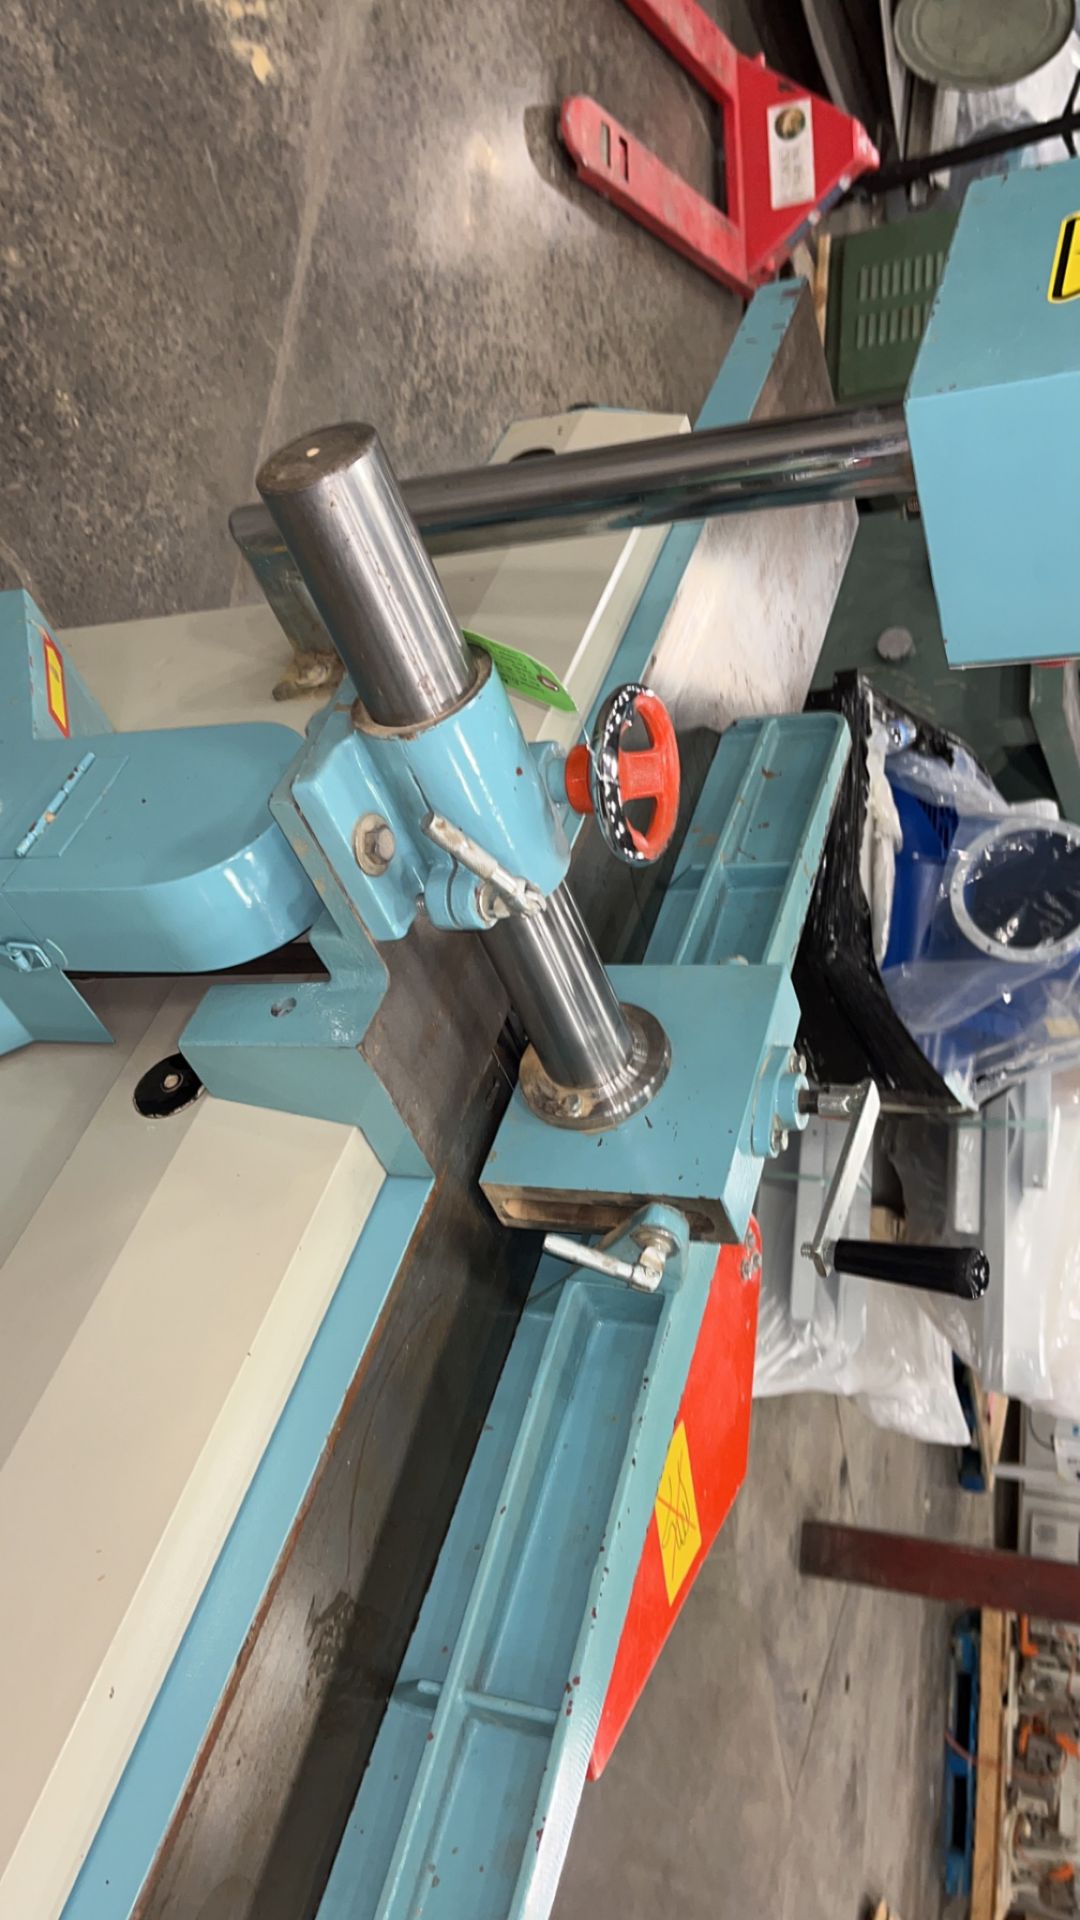 2002 Silver SCC-8612 12"""" Jointer - Image 11 of 11